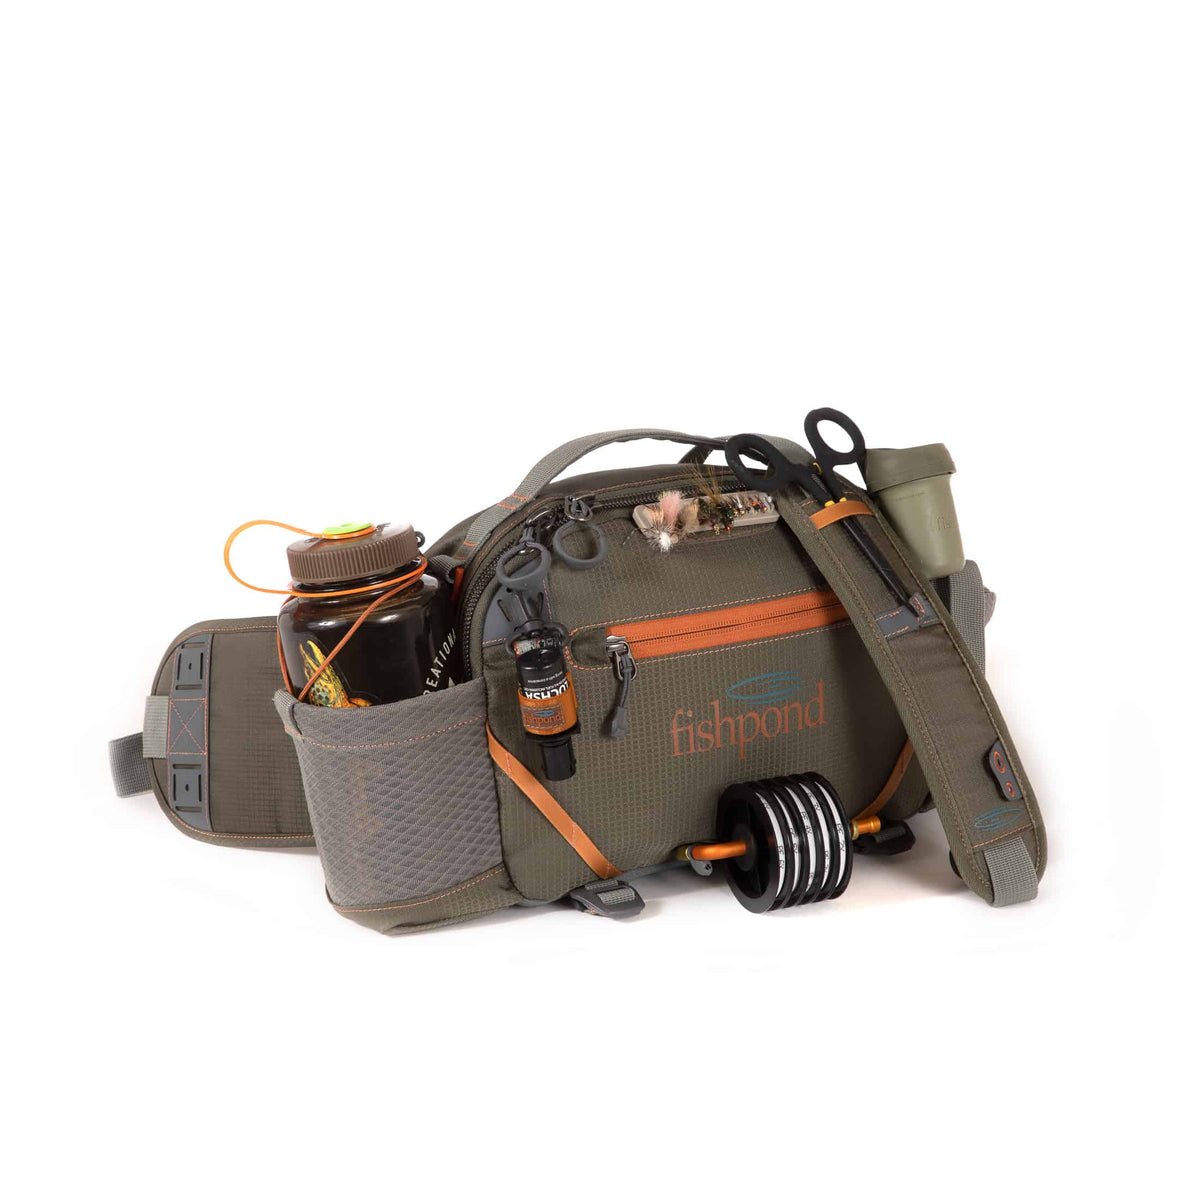 816332015694 EHLP-P Fishpond Elkhorn Lumbar Pack Pebble New Fishpond Waist Pack Front With Accessories